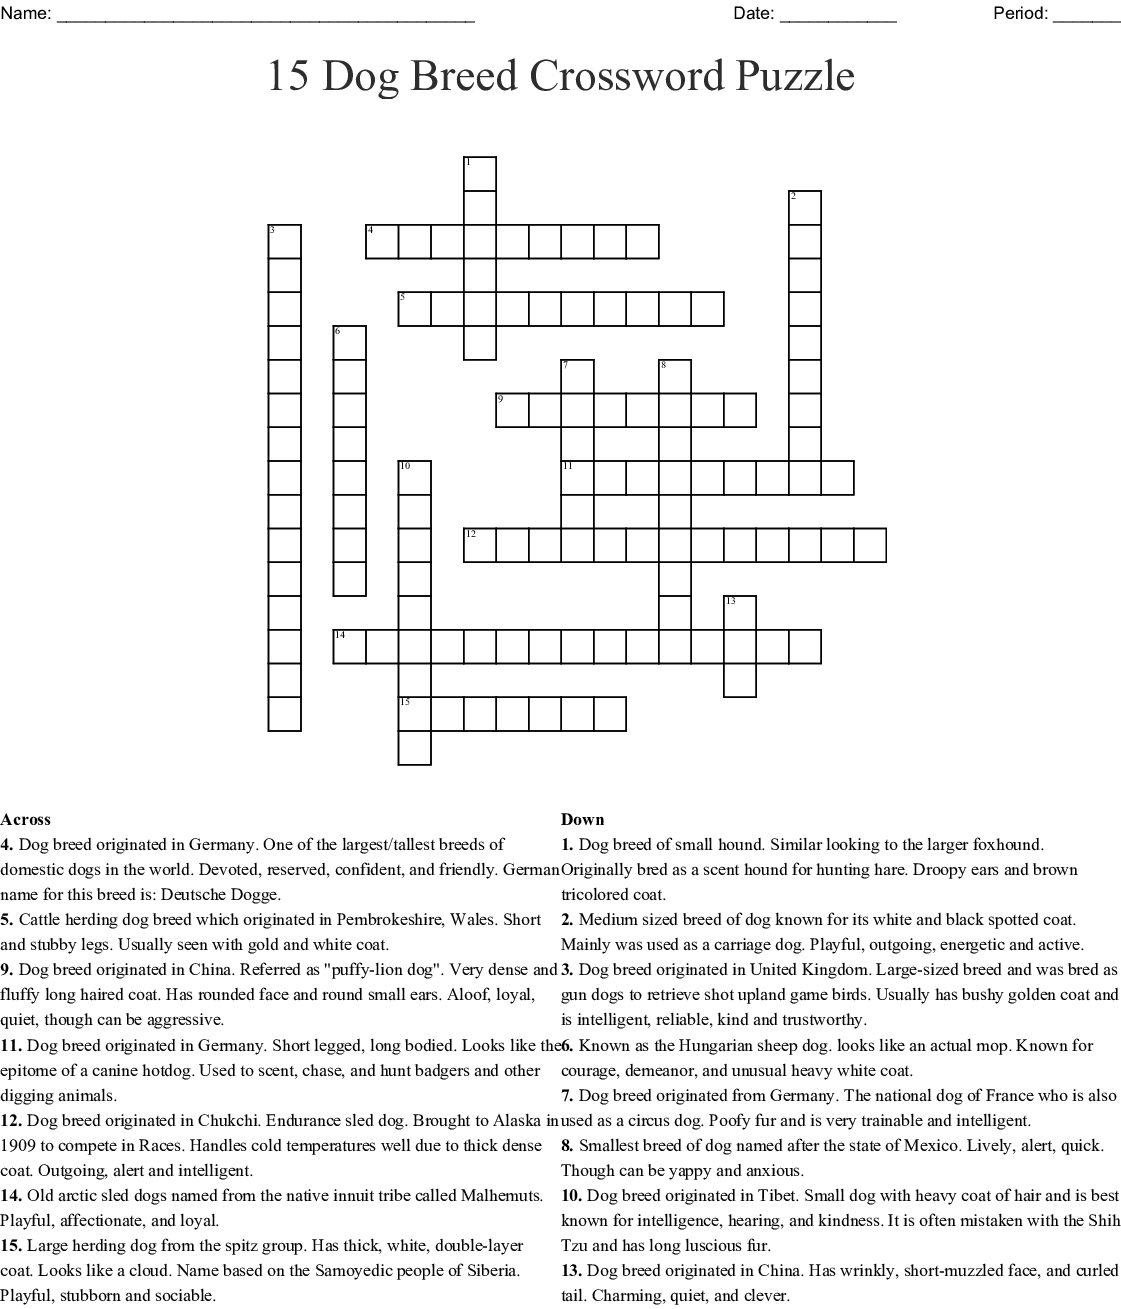 15 Dog Breed Crossword Puzzle Crossword - Wordmint - Printable Crossword Puzzles About Dogs